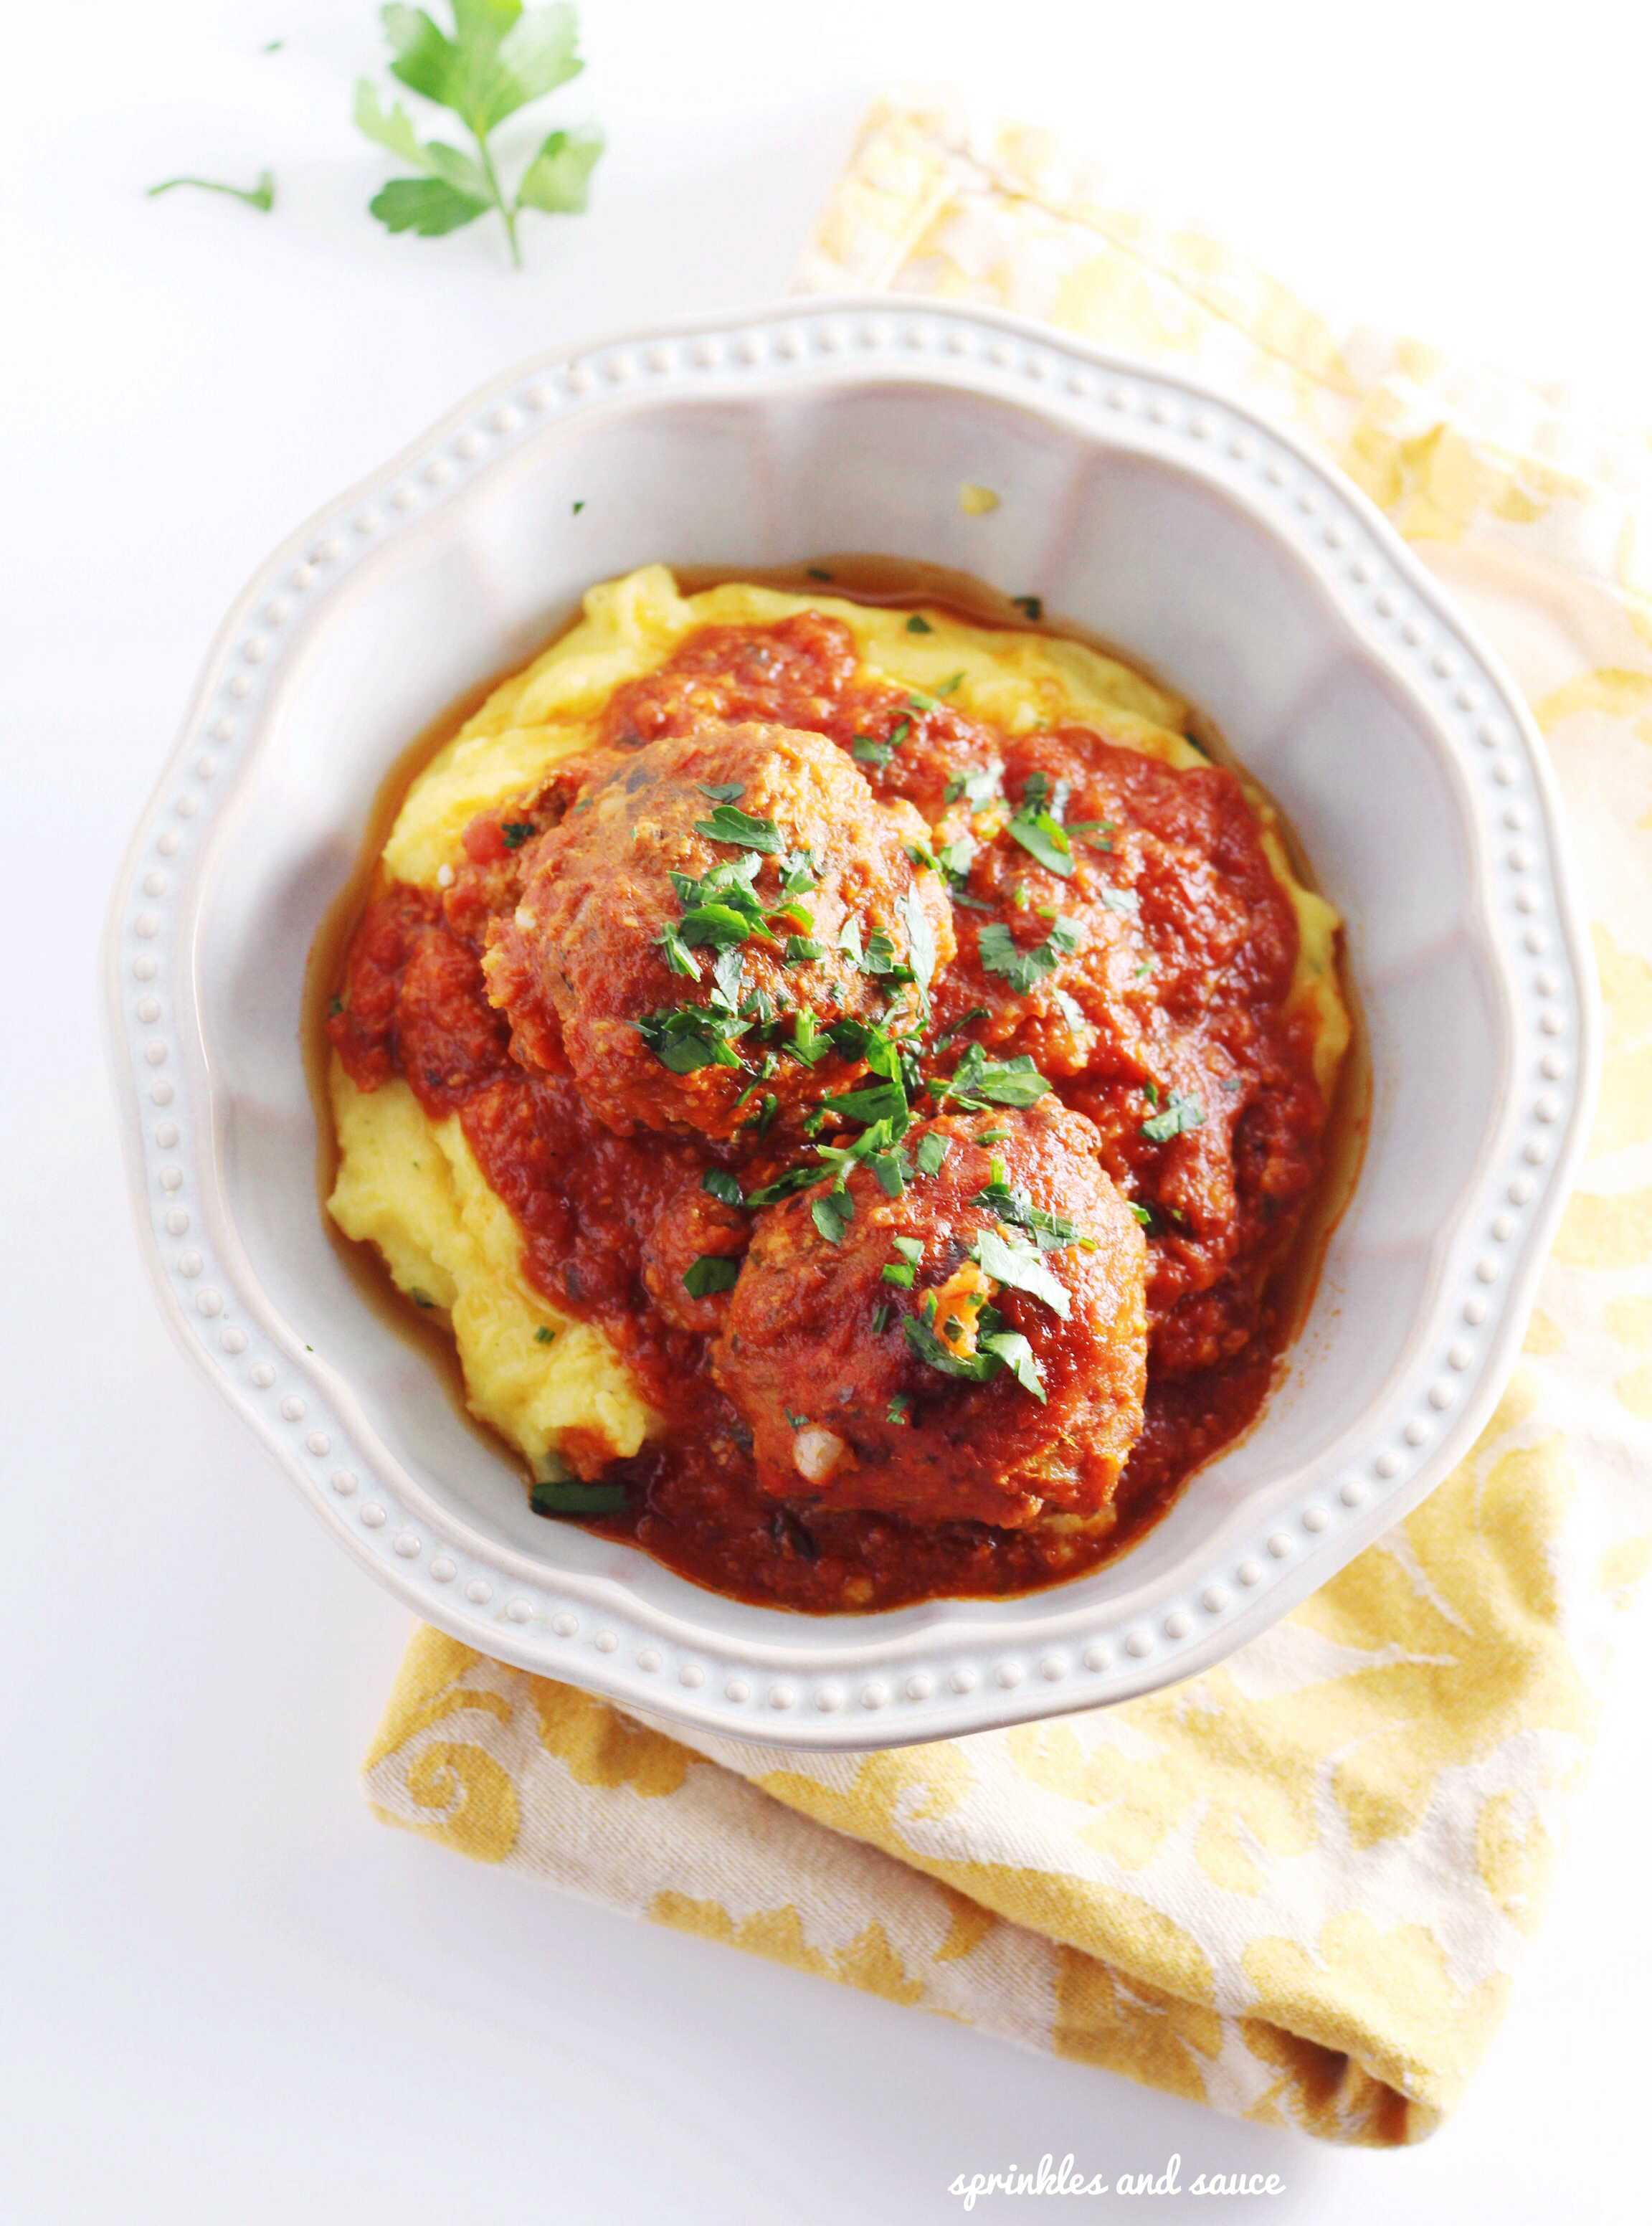 Pork and Veal Meatballs in Tomato Sauce